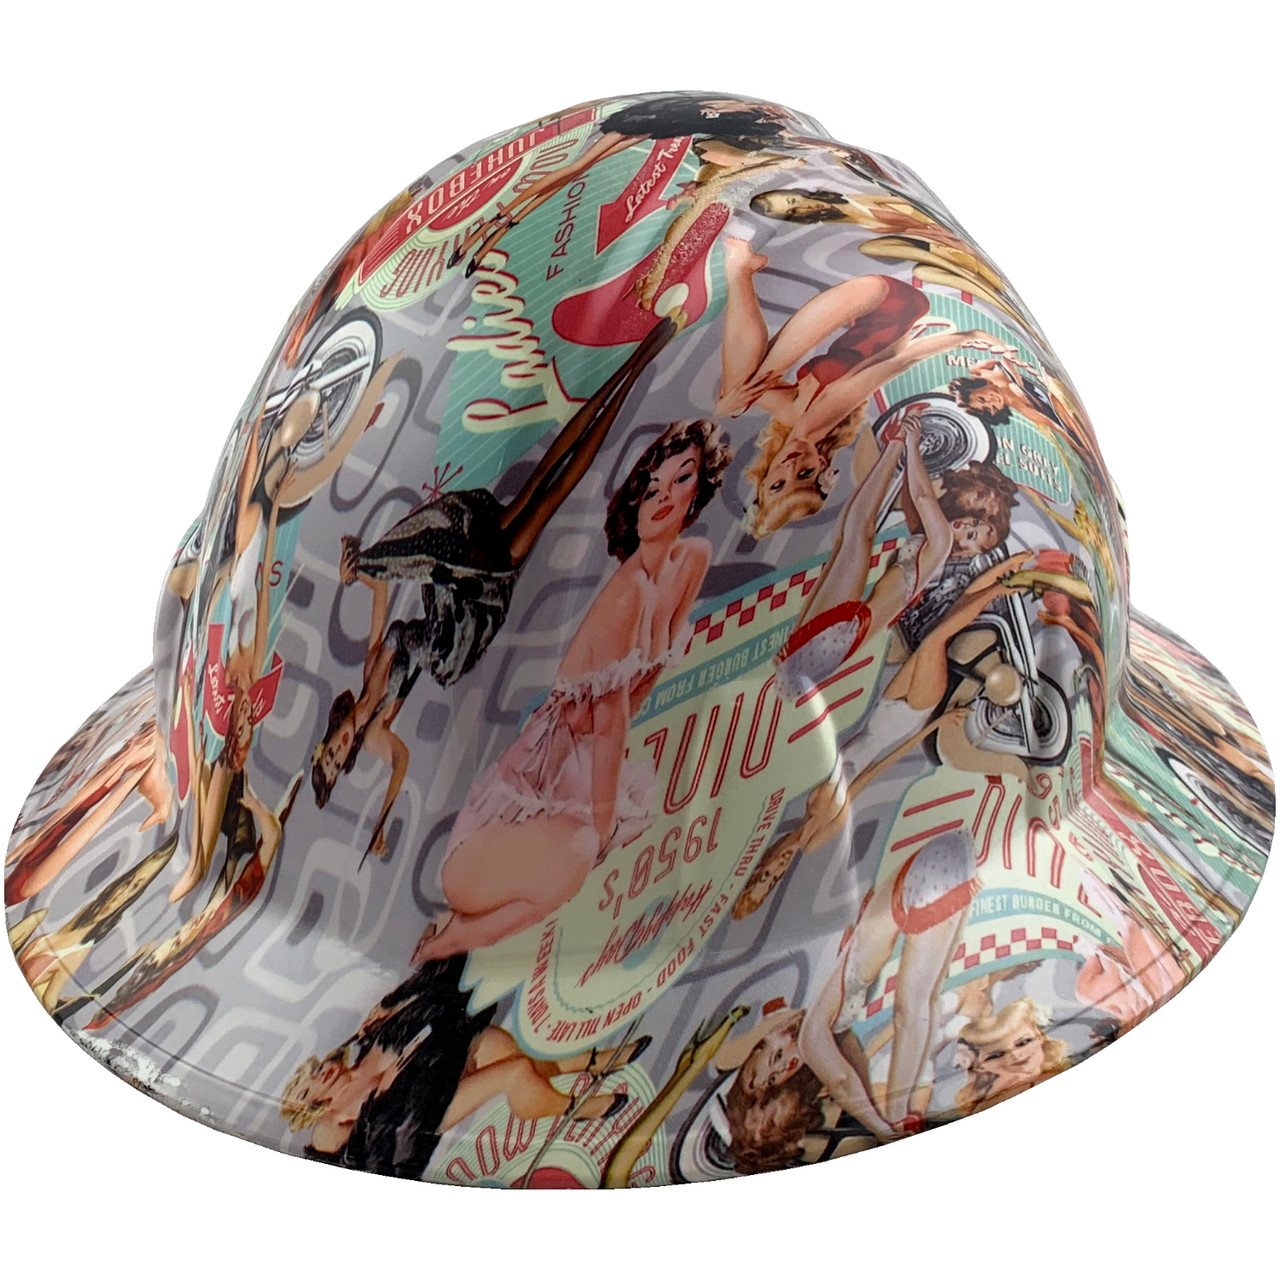 Vintage Pin Up Girls Full Brim Hydro Dipped Hard Hats | Buy Online at  T.A.S.C.O.